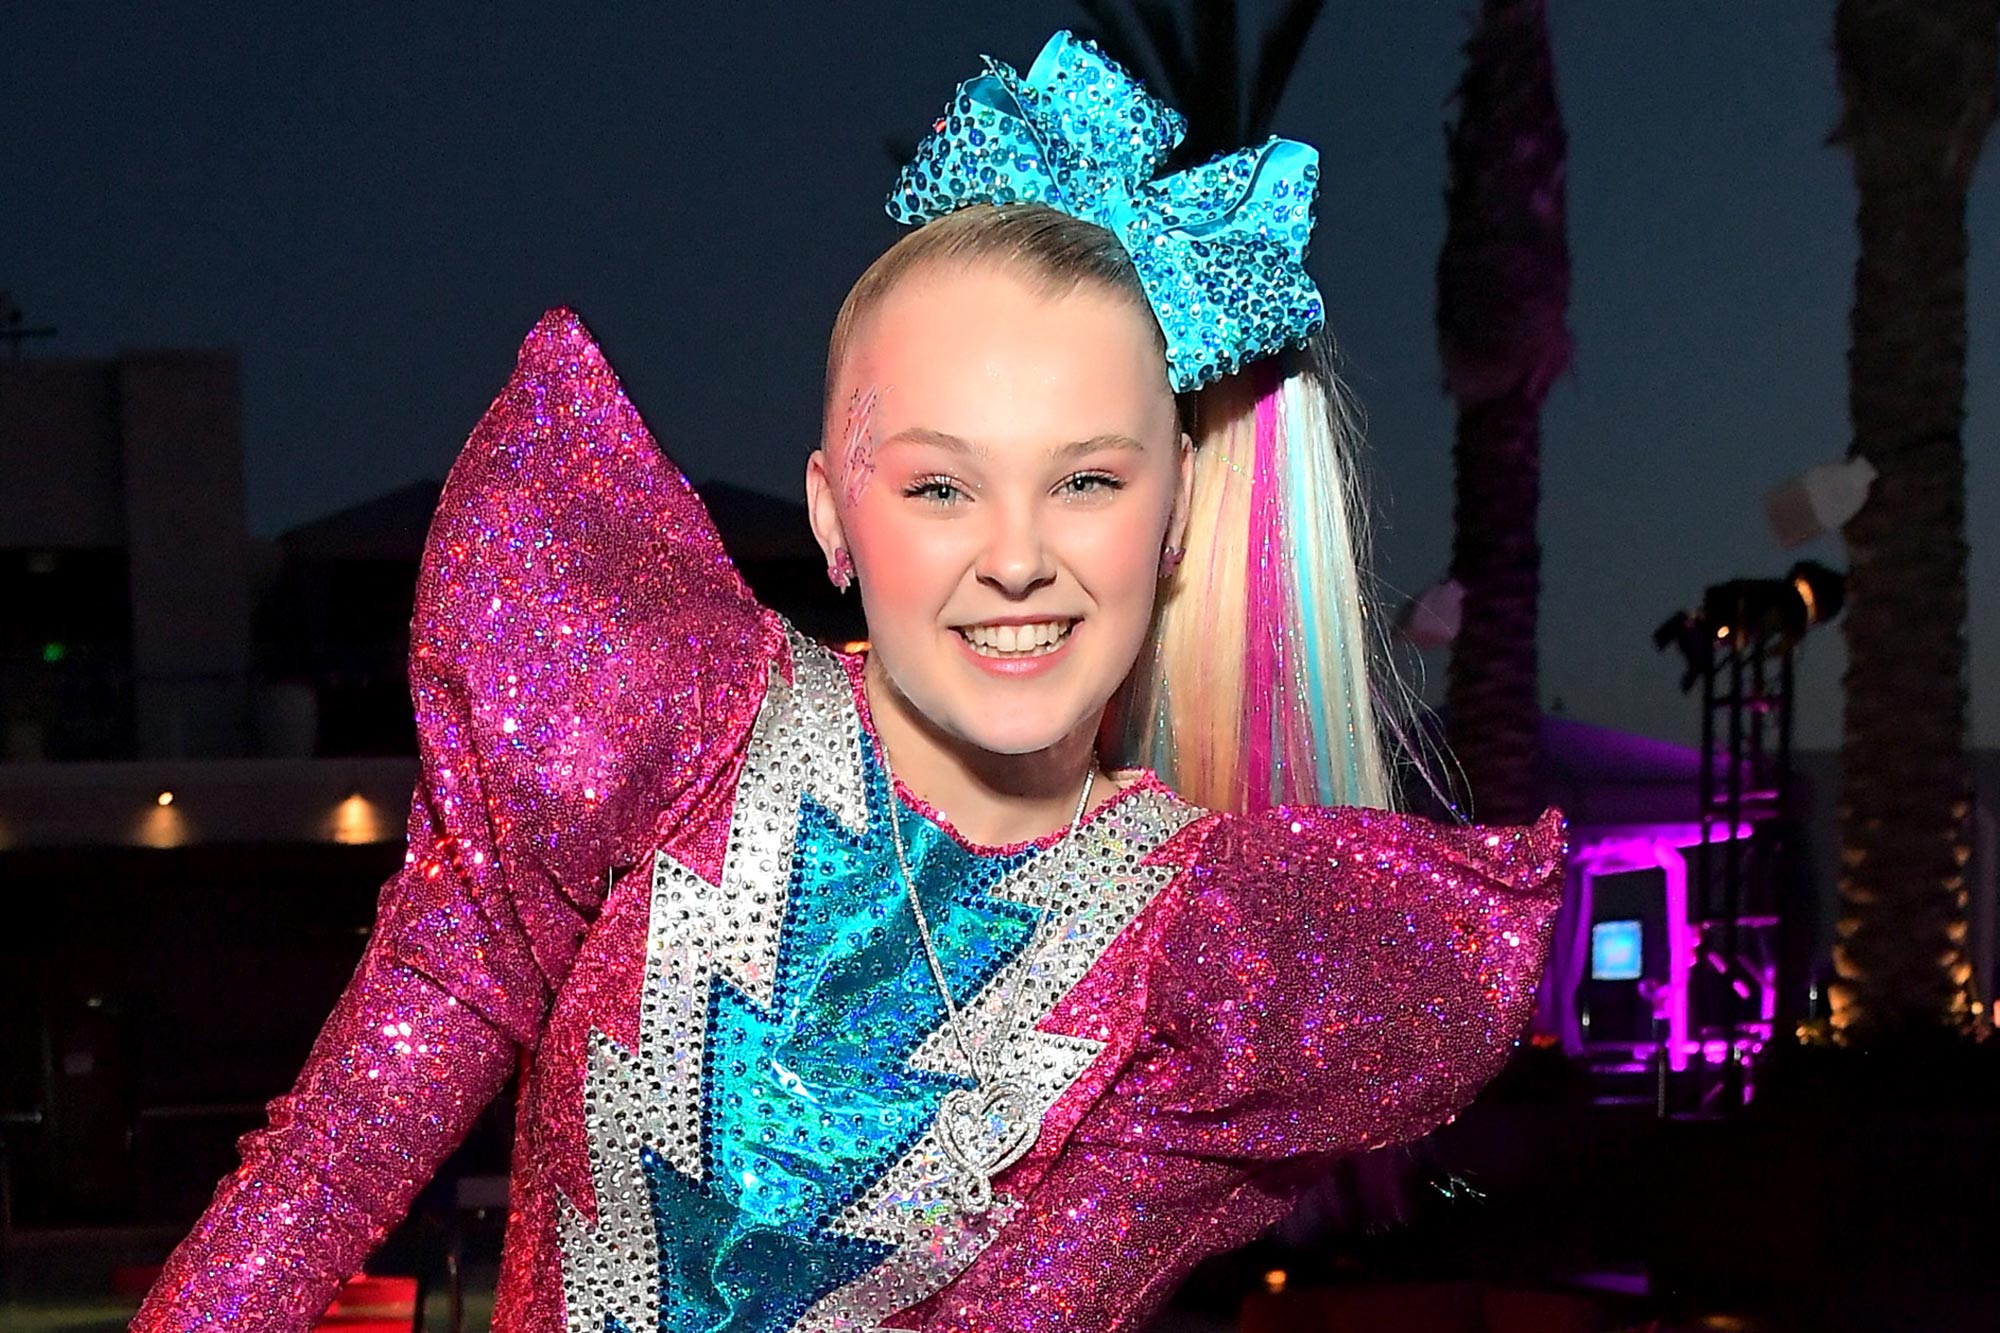 JoJo Siwa to join DWTS with shows first same sex dance pair - Today's ...